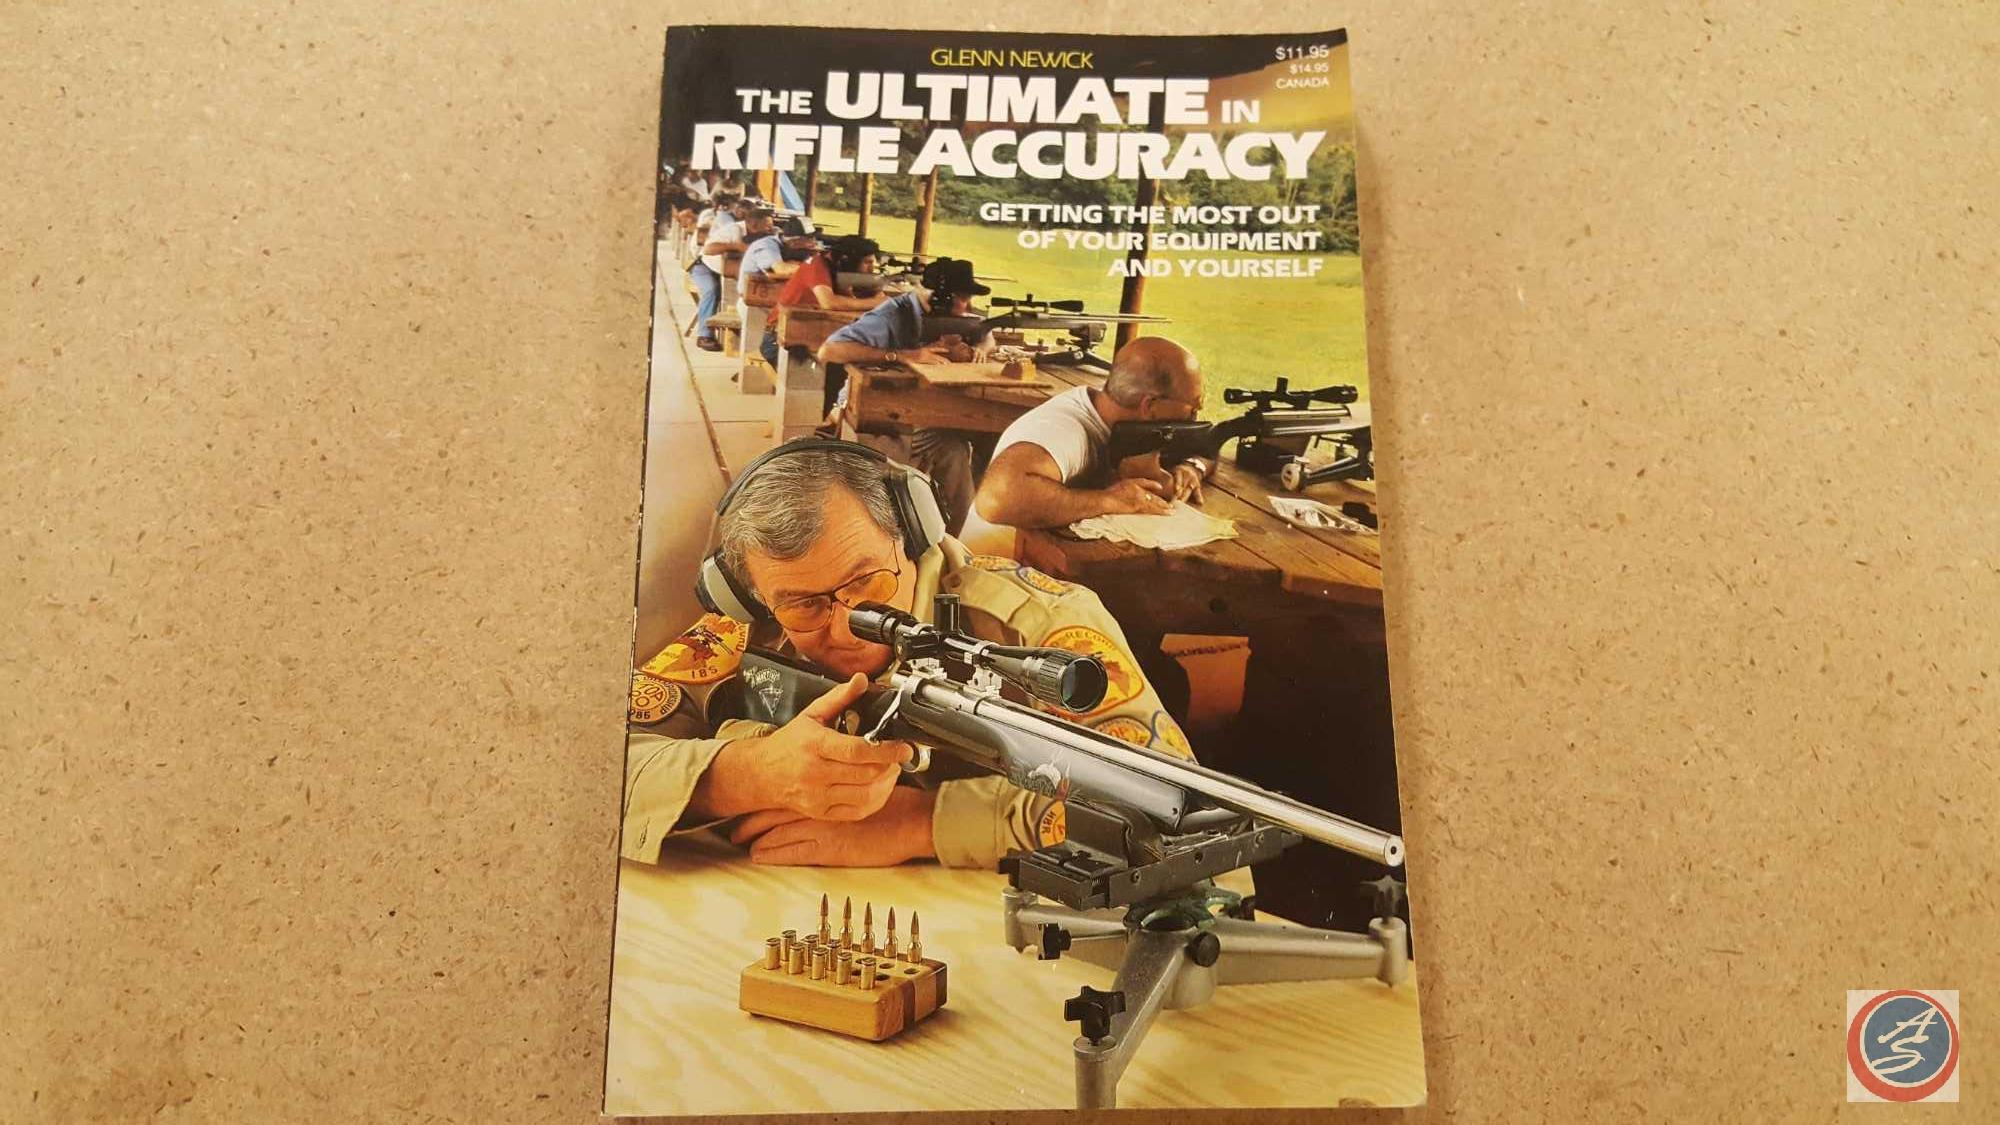 Books Including Titles Such As Hornady Handbook of Cartridge Reloading Vol. 1 and Vol. 2, Speer